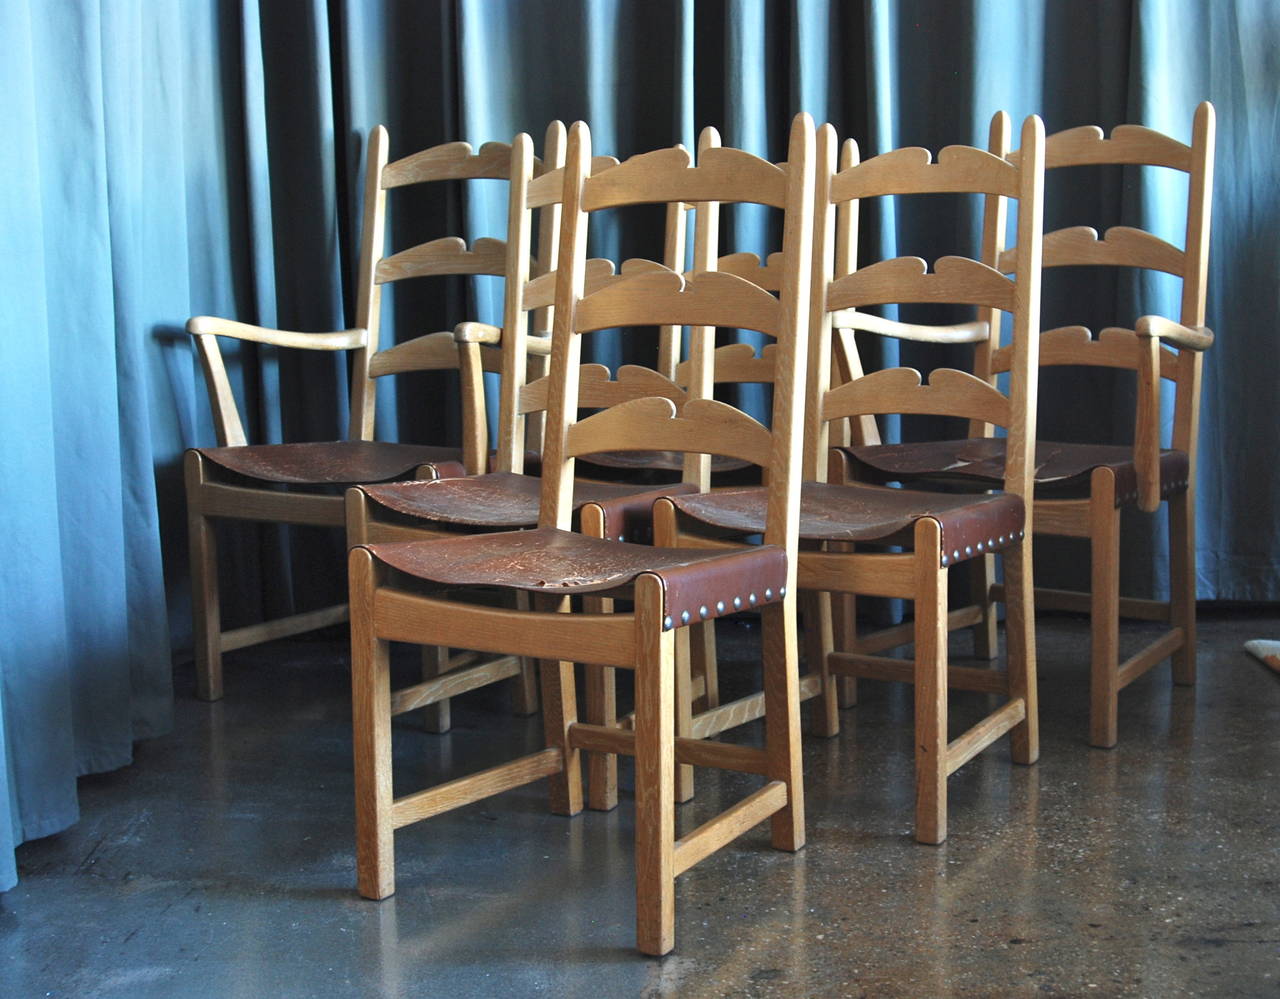 A six chairs dining set by Axel Einar Hjorth, Sweden, circa 1940.
Cerused oak with leather seats.
Marked: AE Hjorth.
Wood frame in perfect vintage condition. Original leather seats heavily damaged.